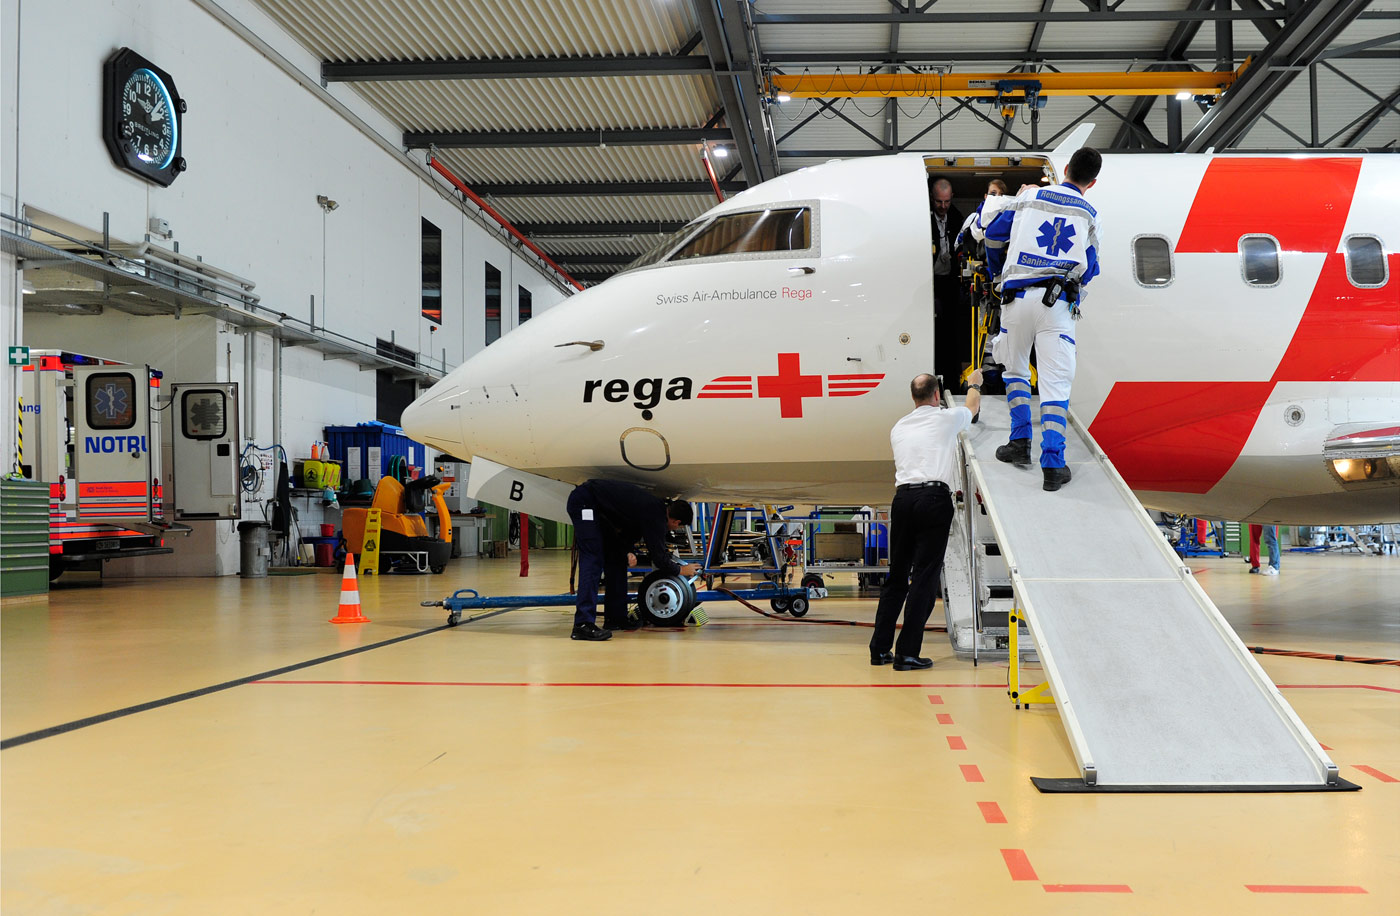 The patient is taken by ambulance to hospital, Rega Headquarters Zurich Airport, 2012